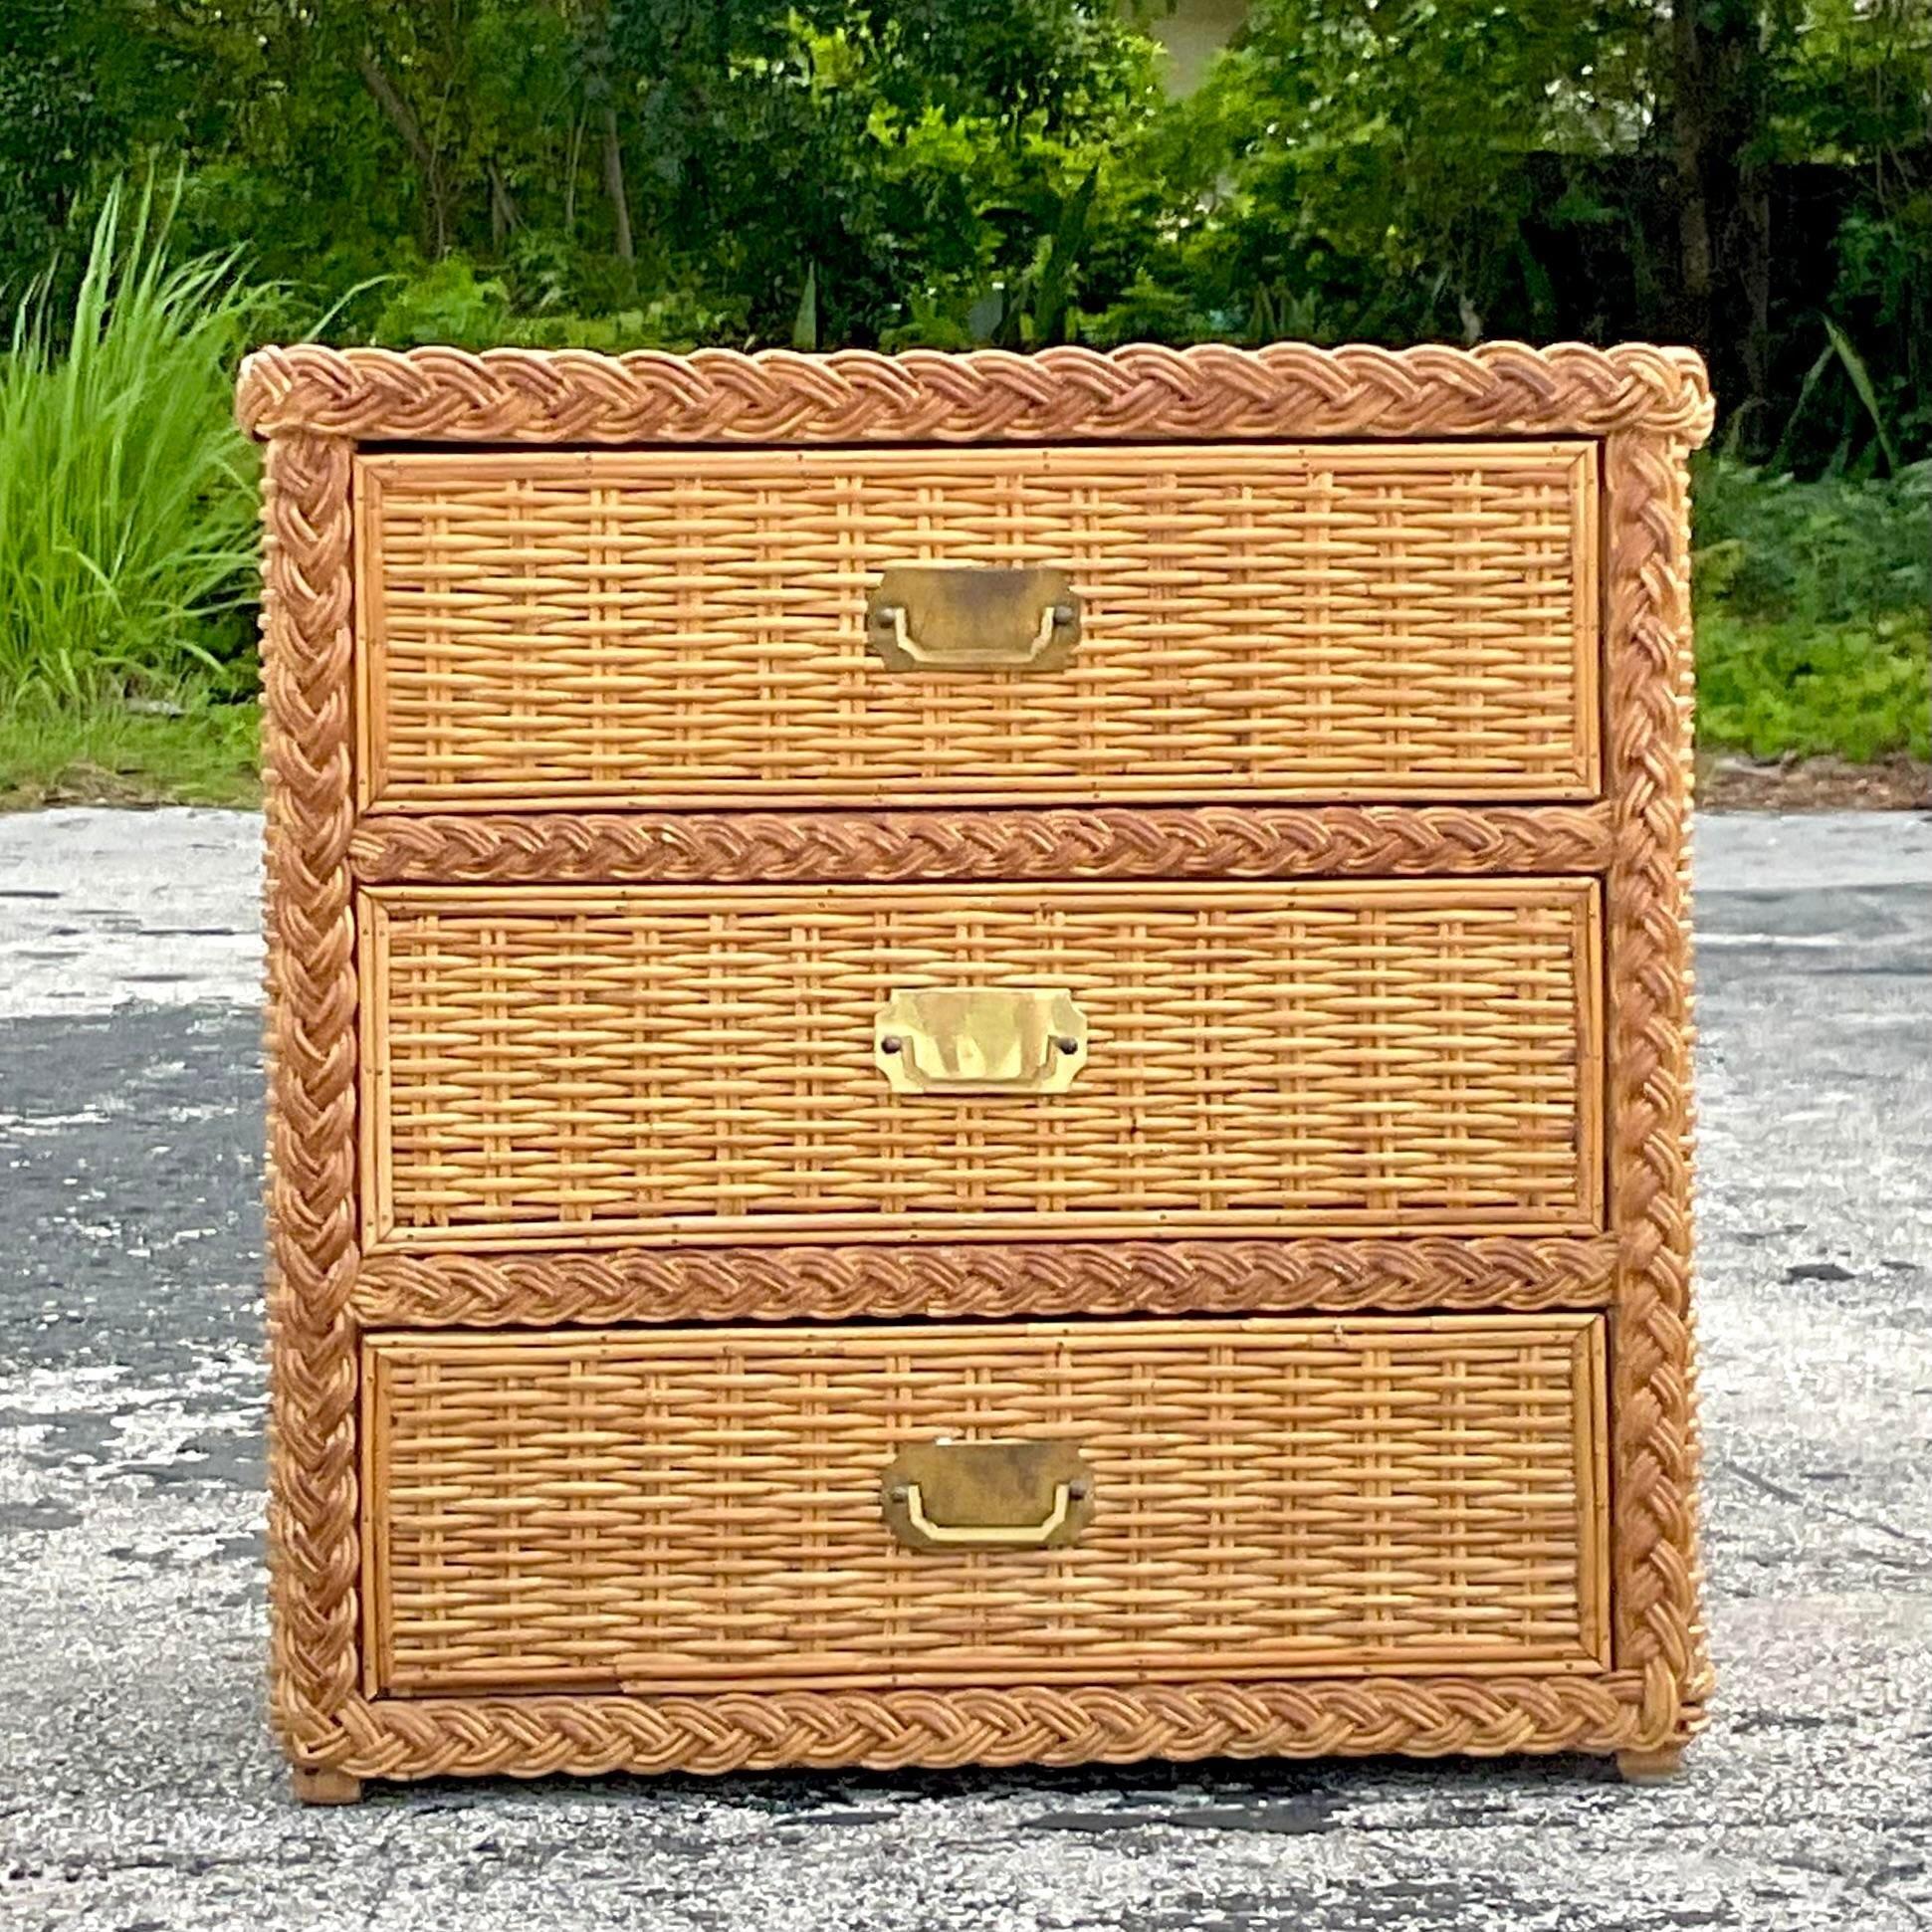 A fantastic vintage Coastal chest of drawers. A chic braided rattan trim on a thick woven rattan design. Brass Campaign hardware. Acquired from a Palm Beach estate.